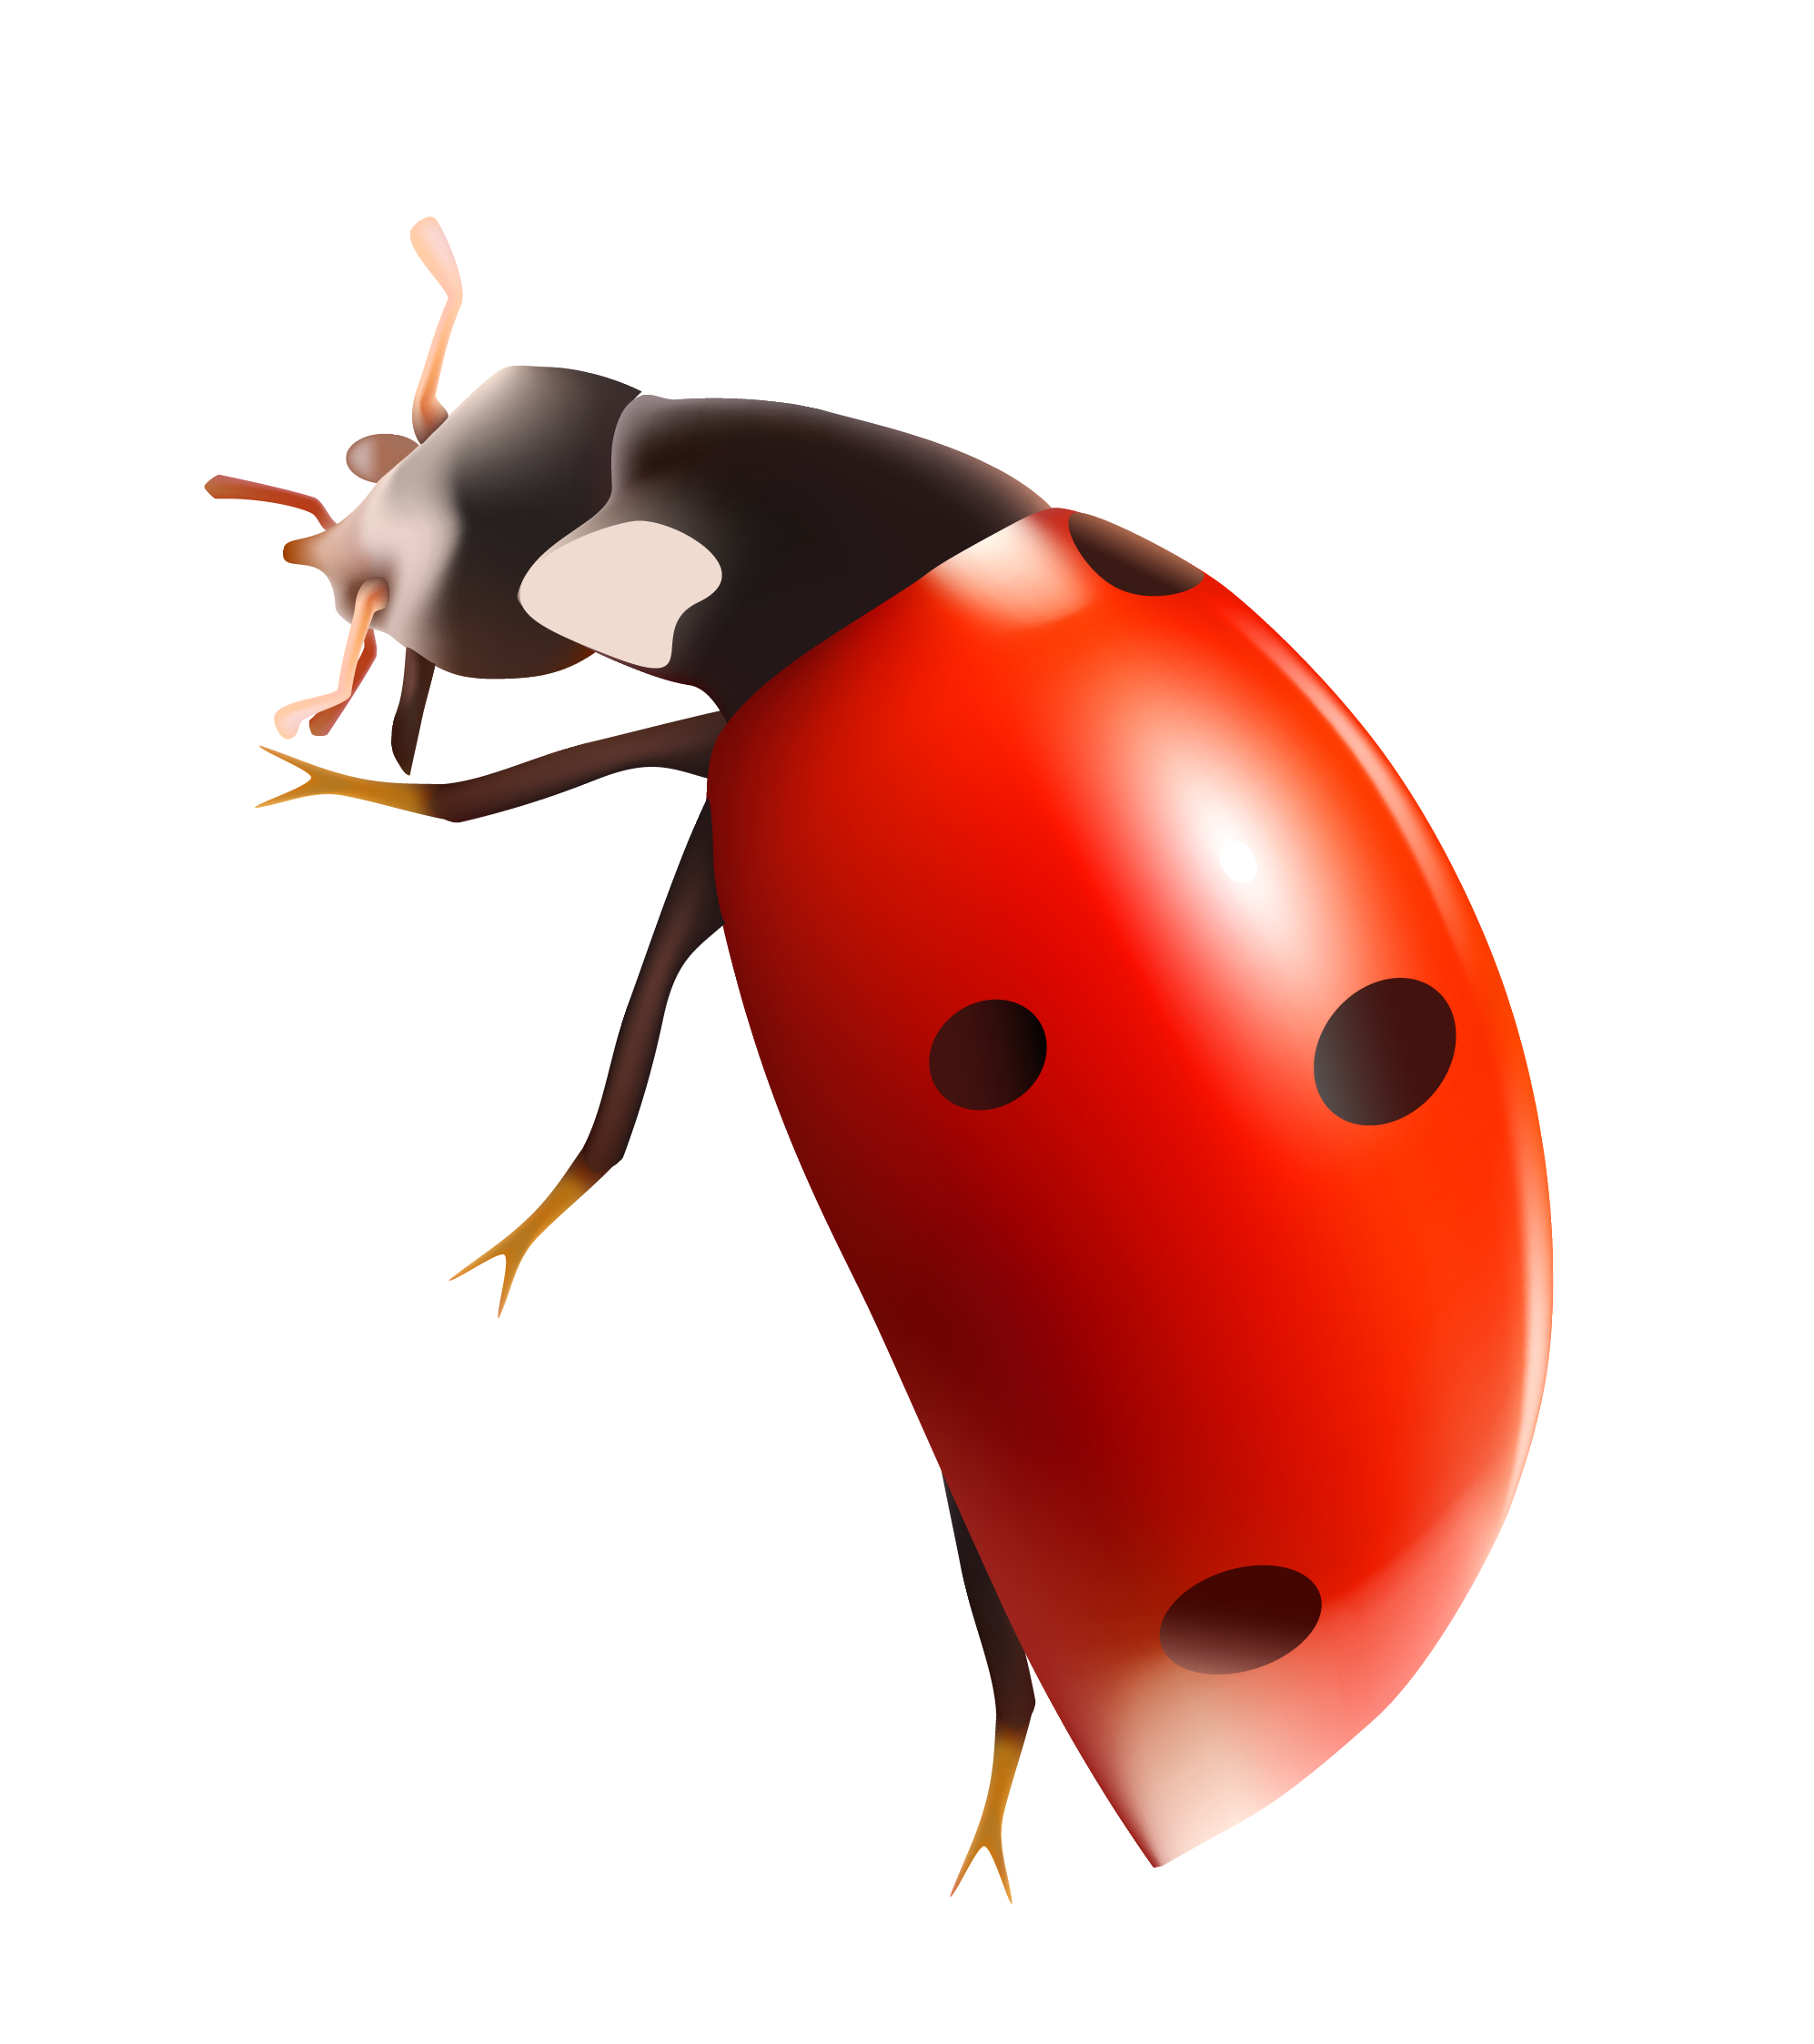 Lady bug png gallery. Insect clipart dead insect